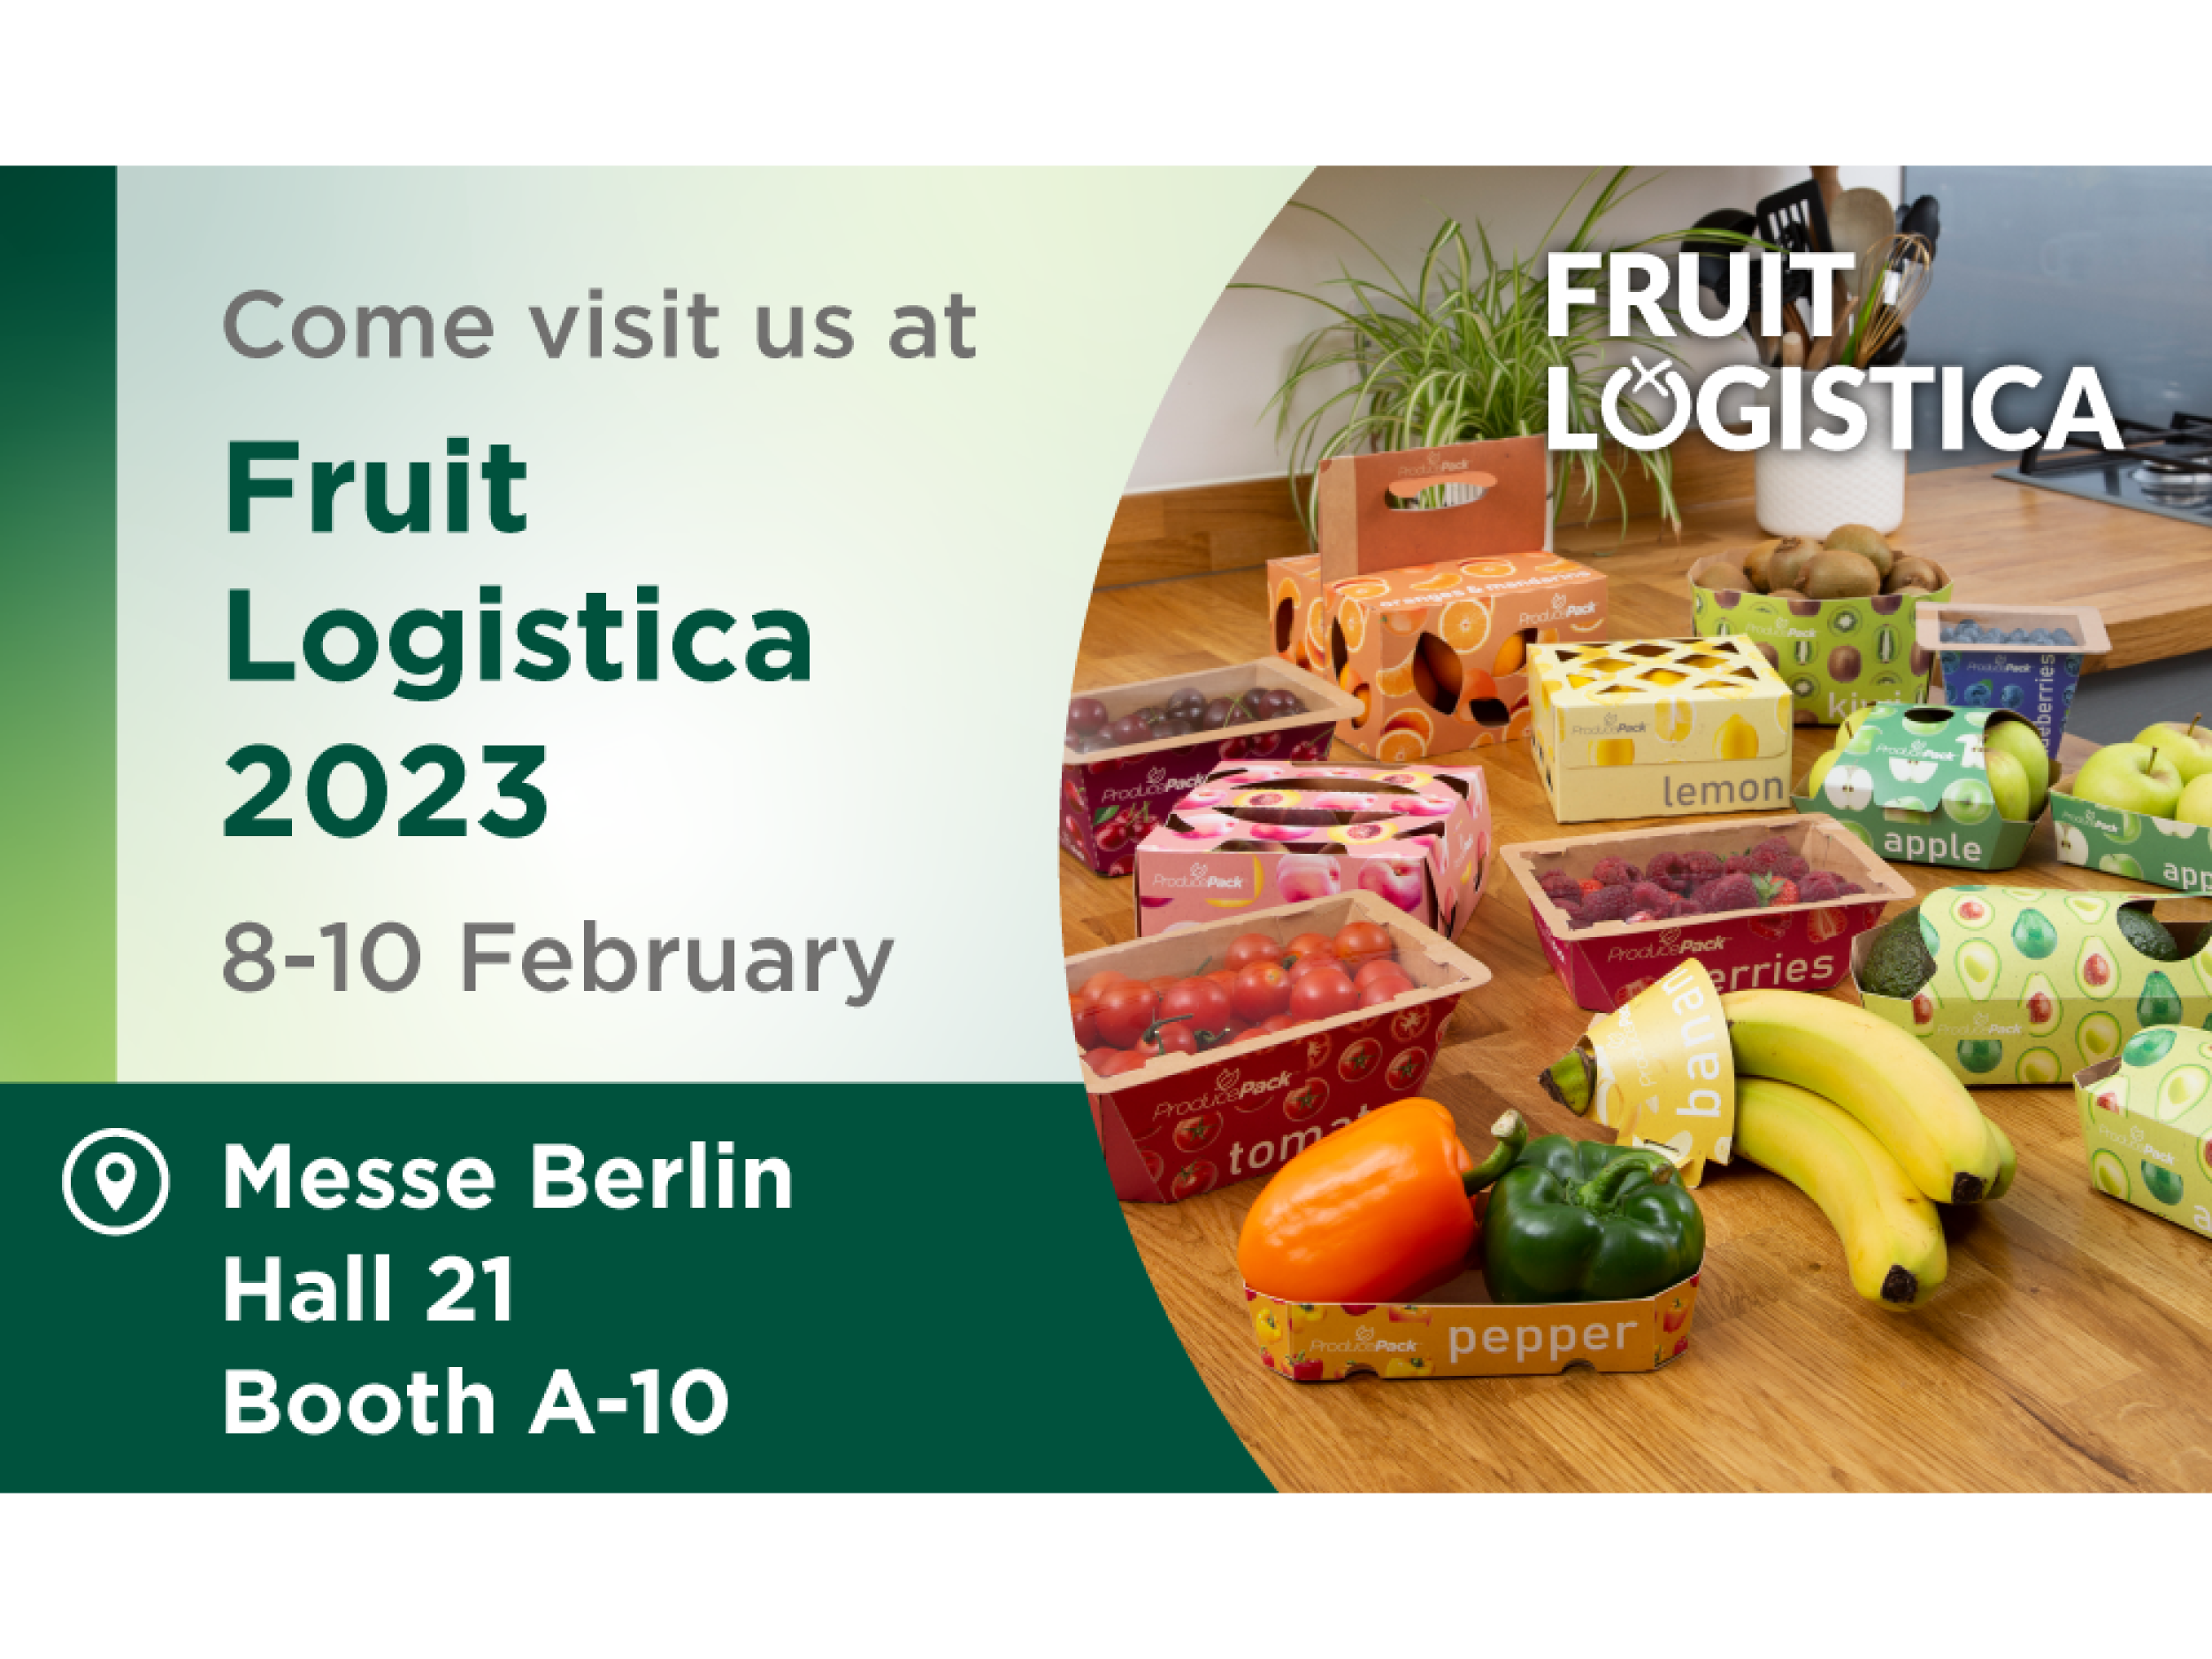 Visit Graphic Packaging International at Fruit Logistica 2023 and see our full range of fresh produce packaging.